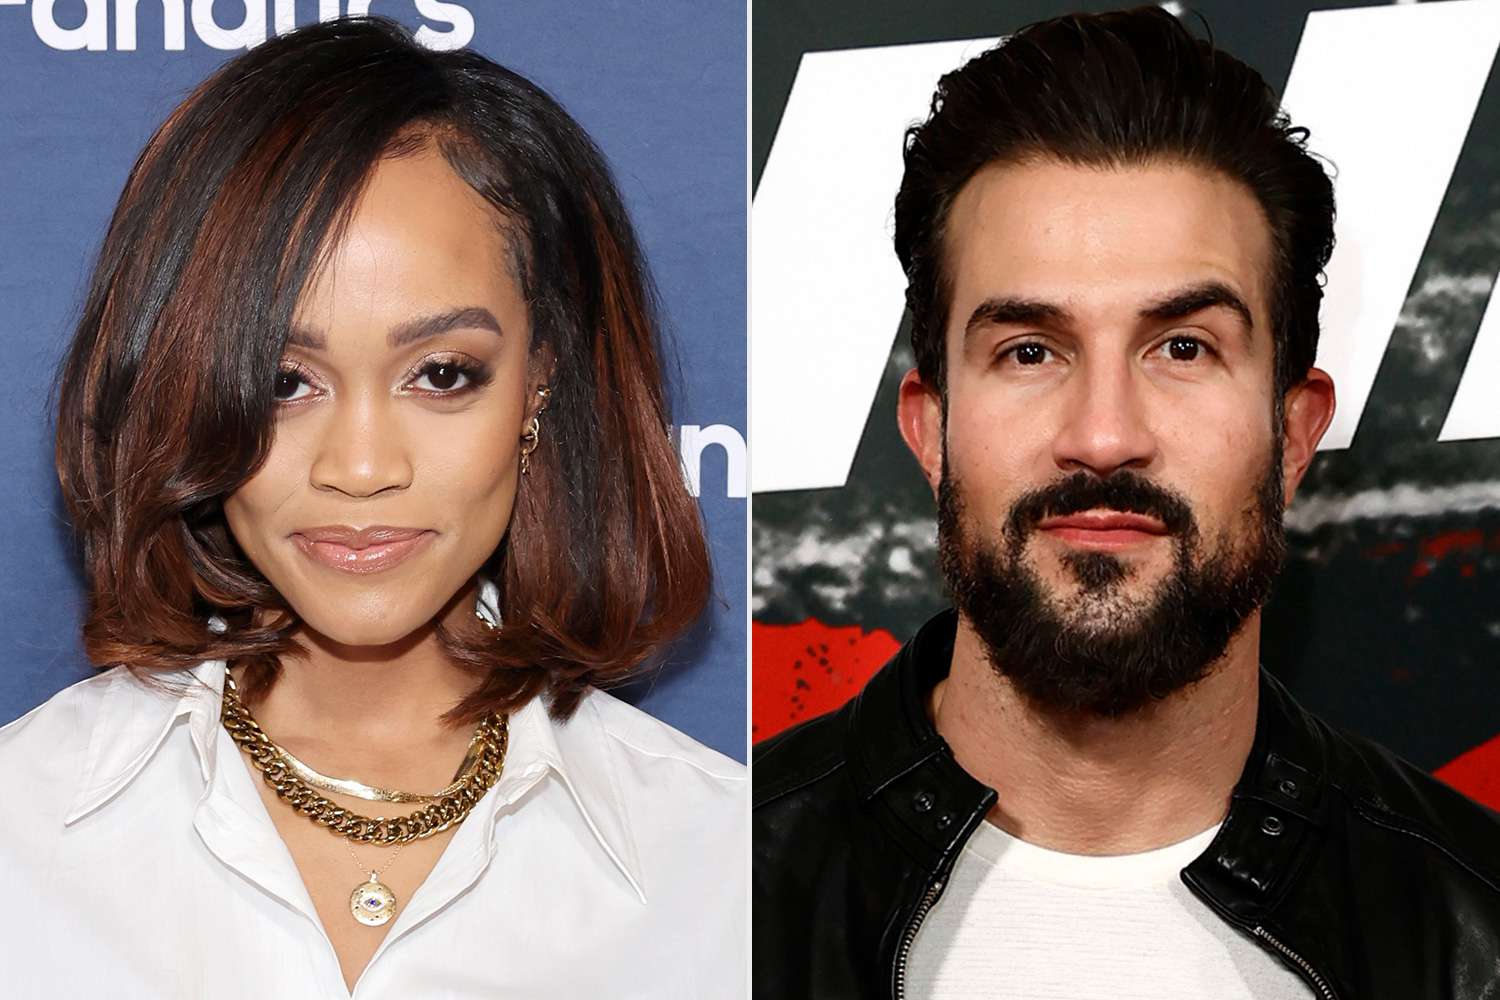 Rachel Lindsay Ordered to Pay Ex Bryan Abasolo $13K Monthly in Spousal Support Despite Opposing His Request